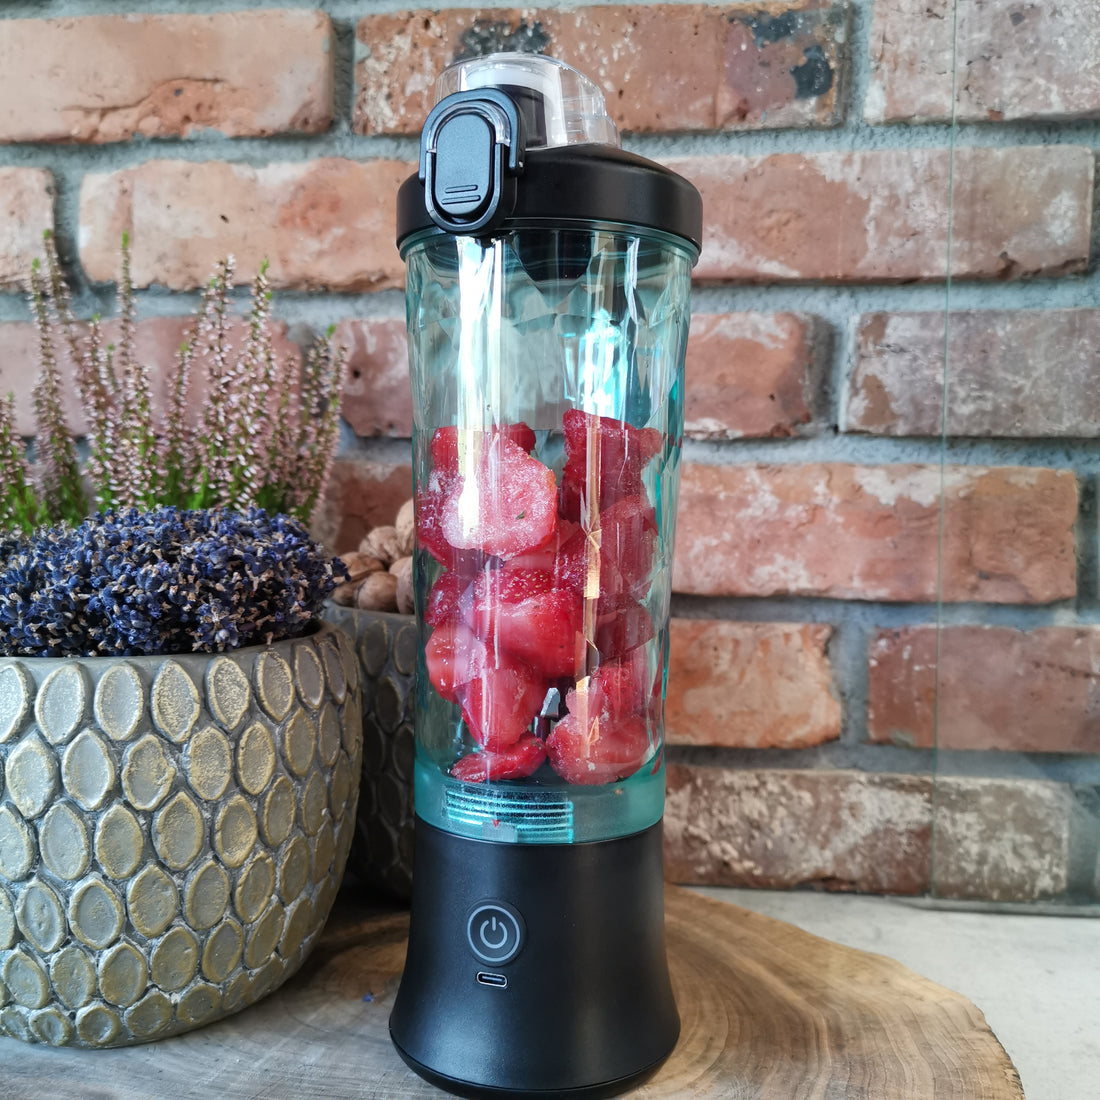 portable blender with strawberries